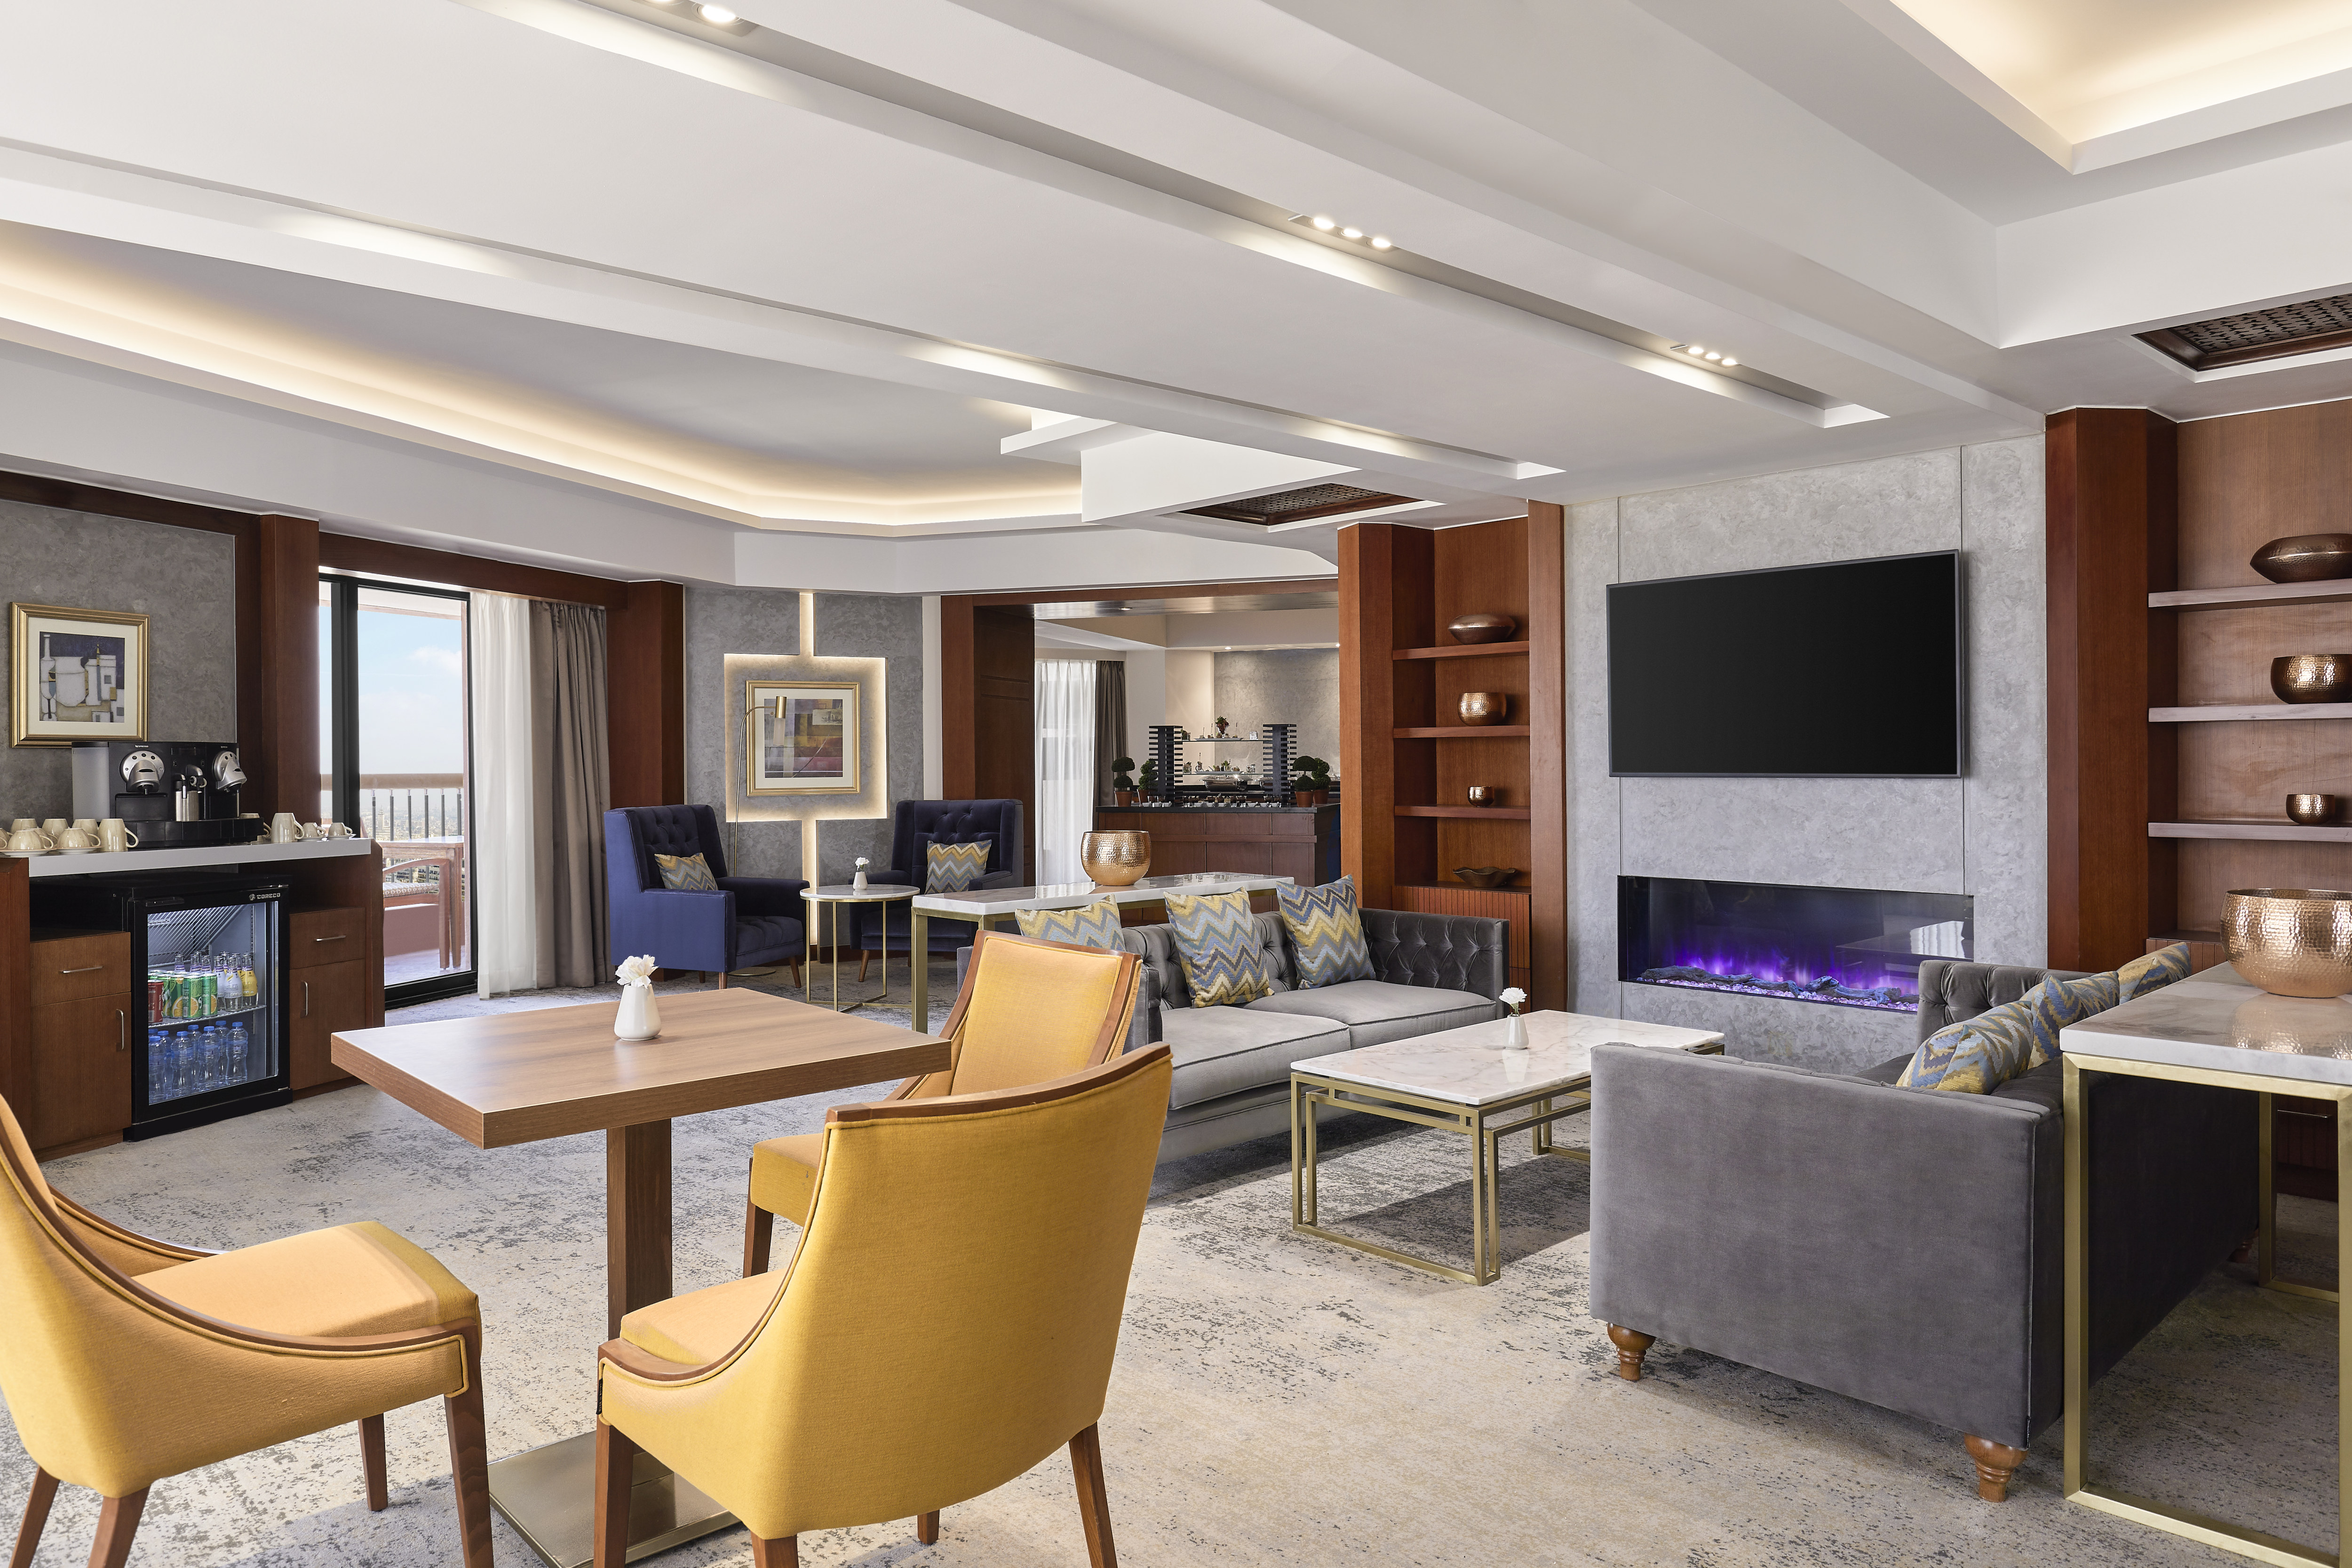 Executive Lounge with Wet Bar, Fireplace, and TV